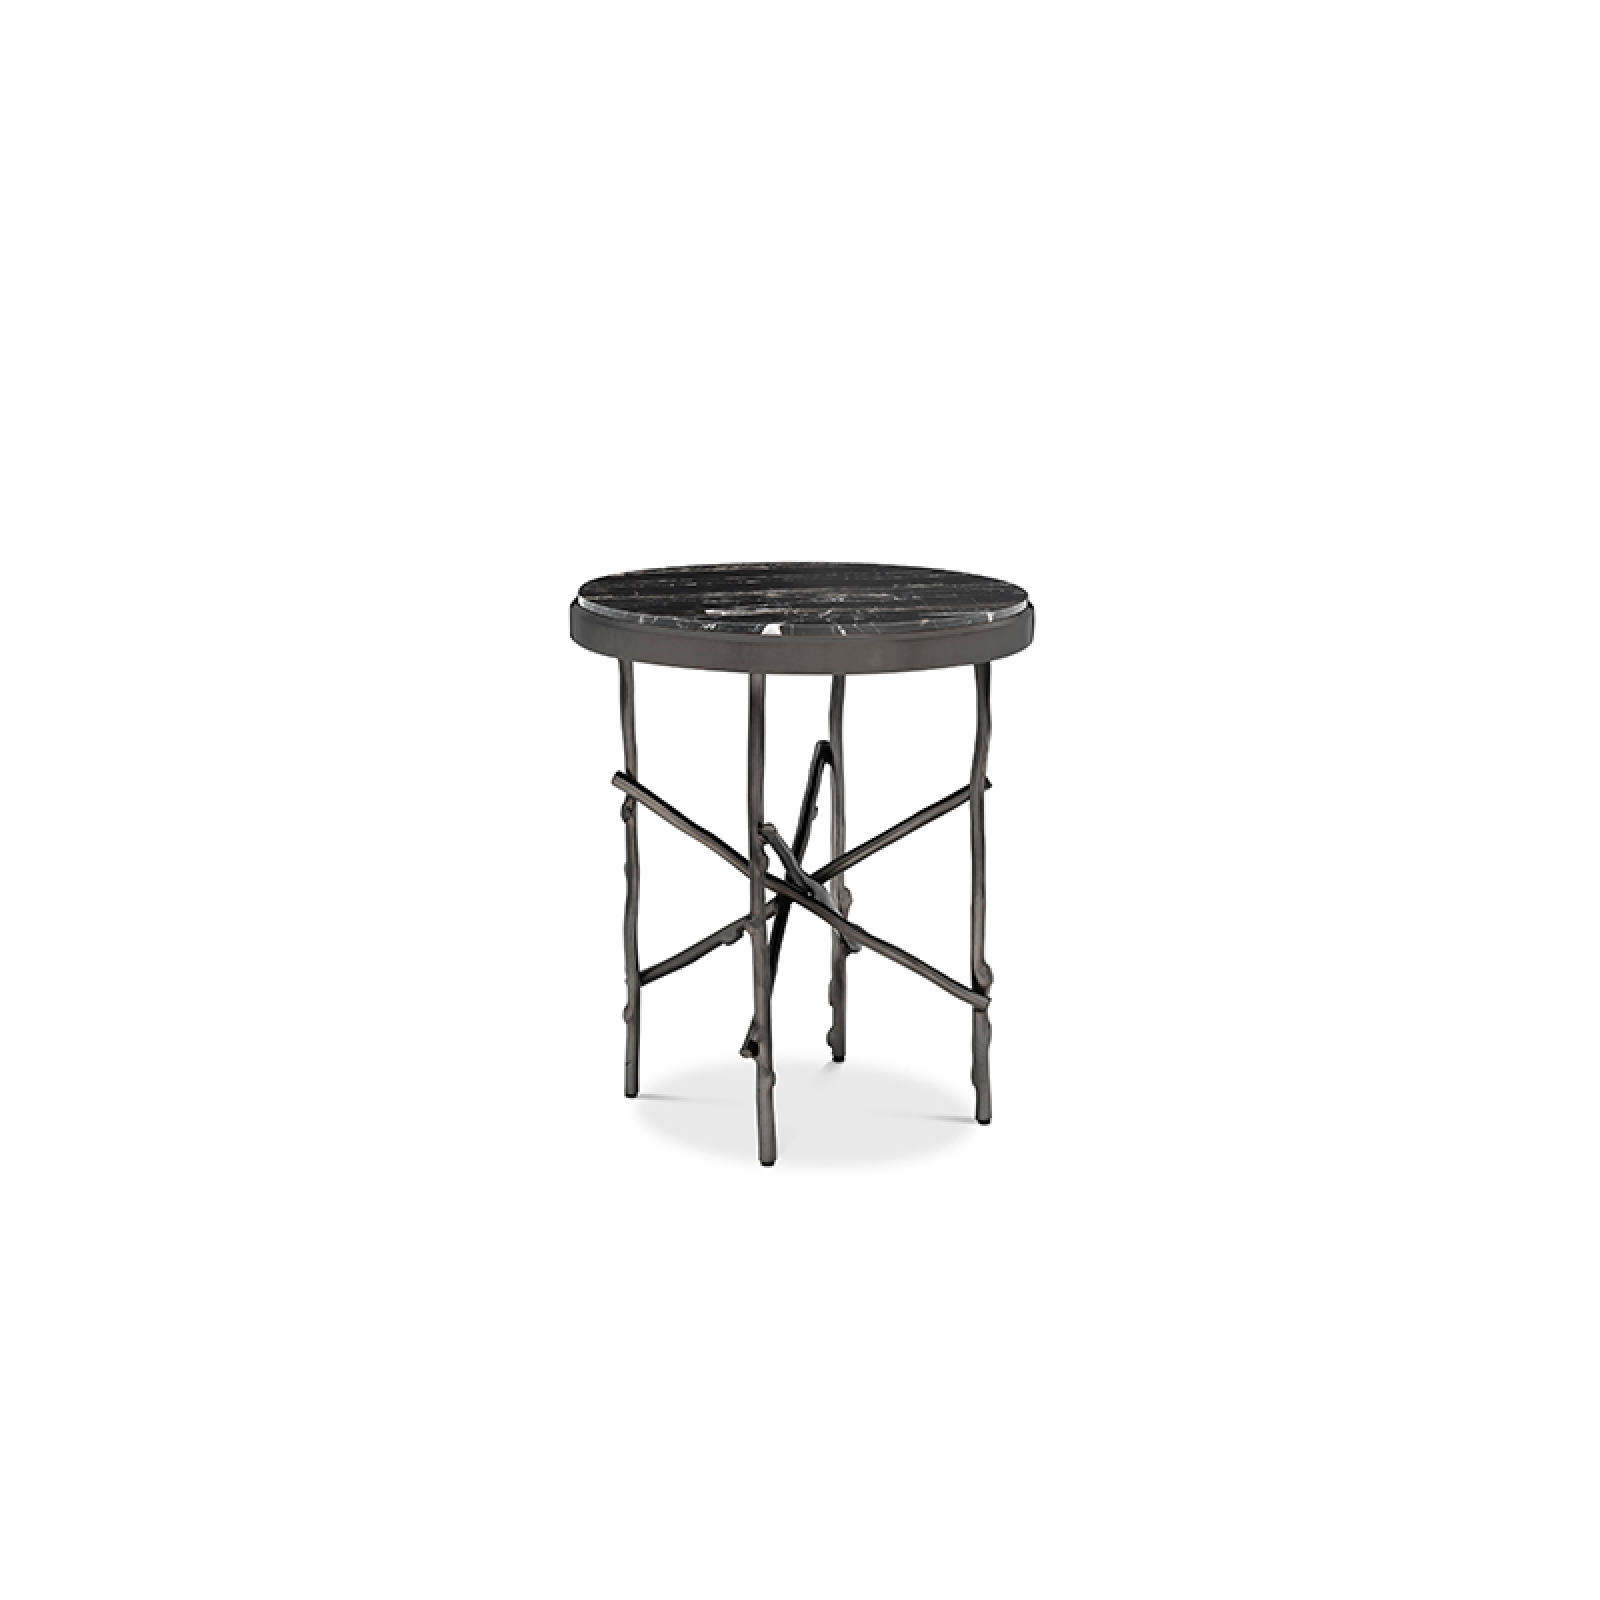 Tomasso side table